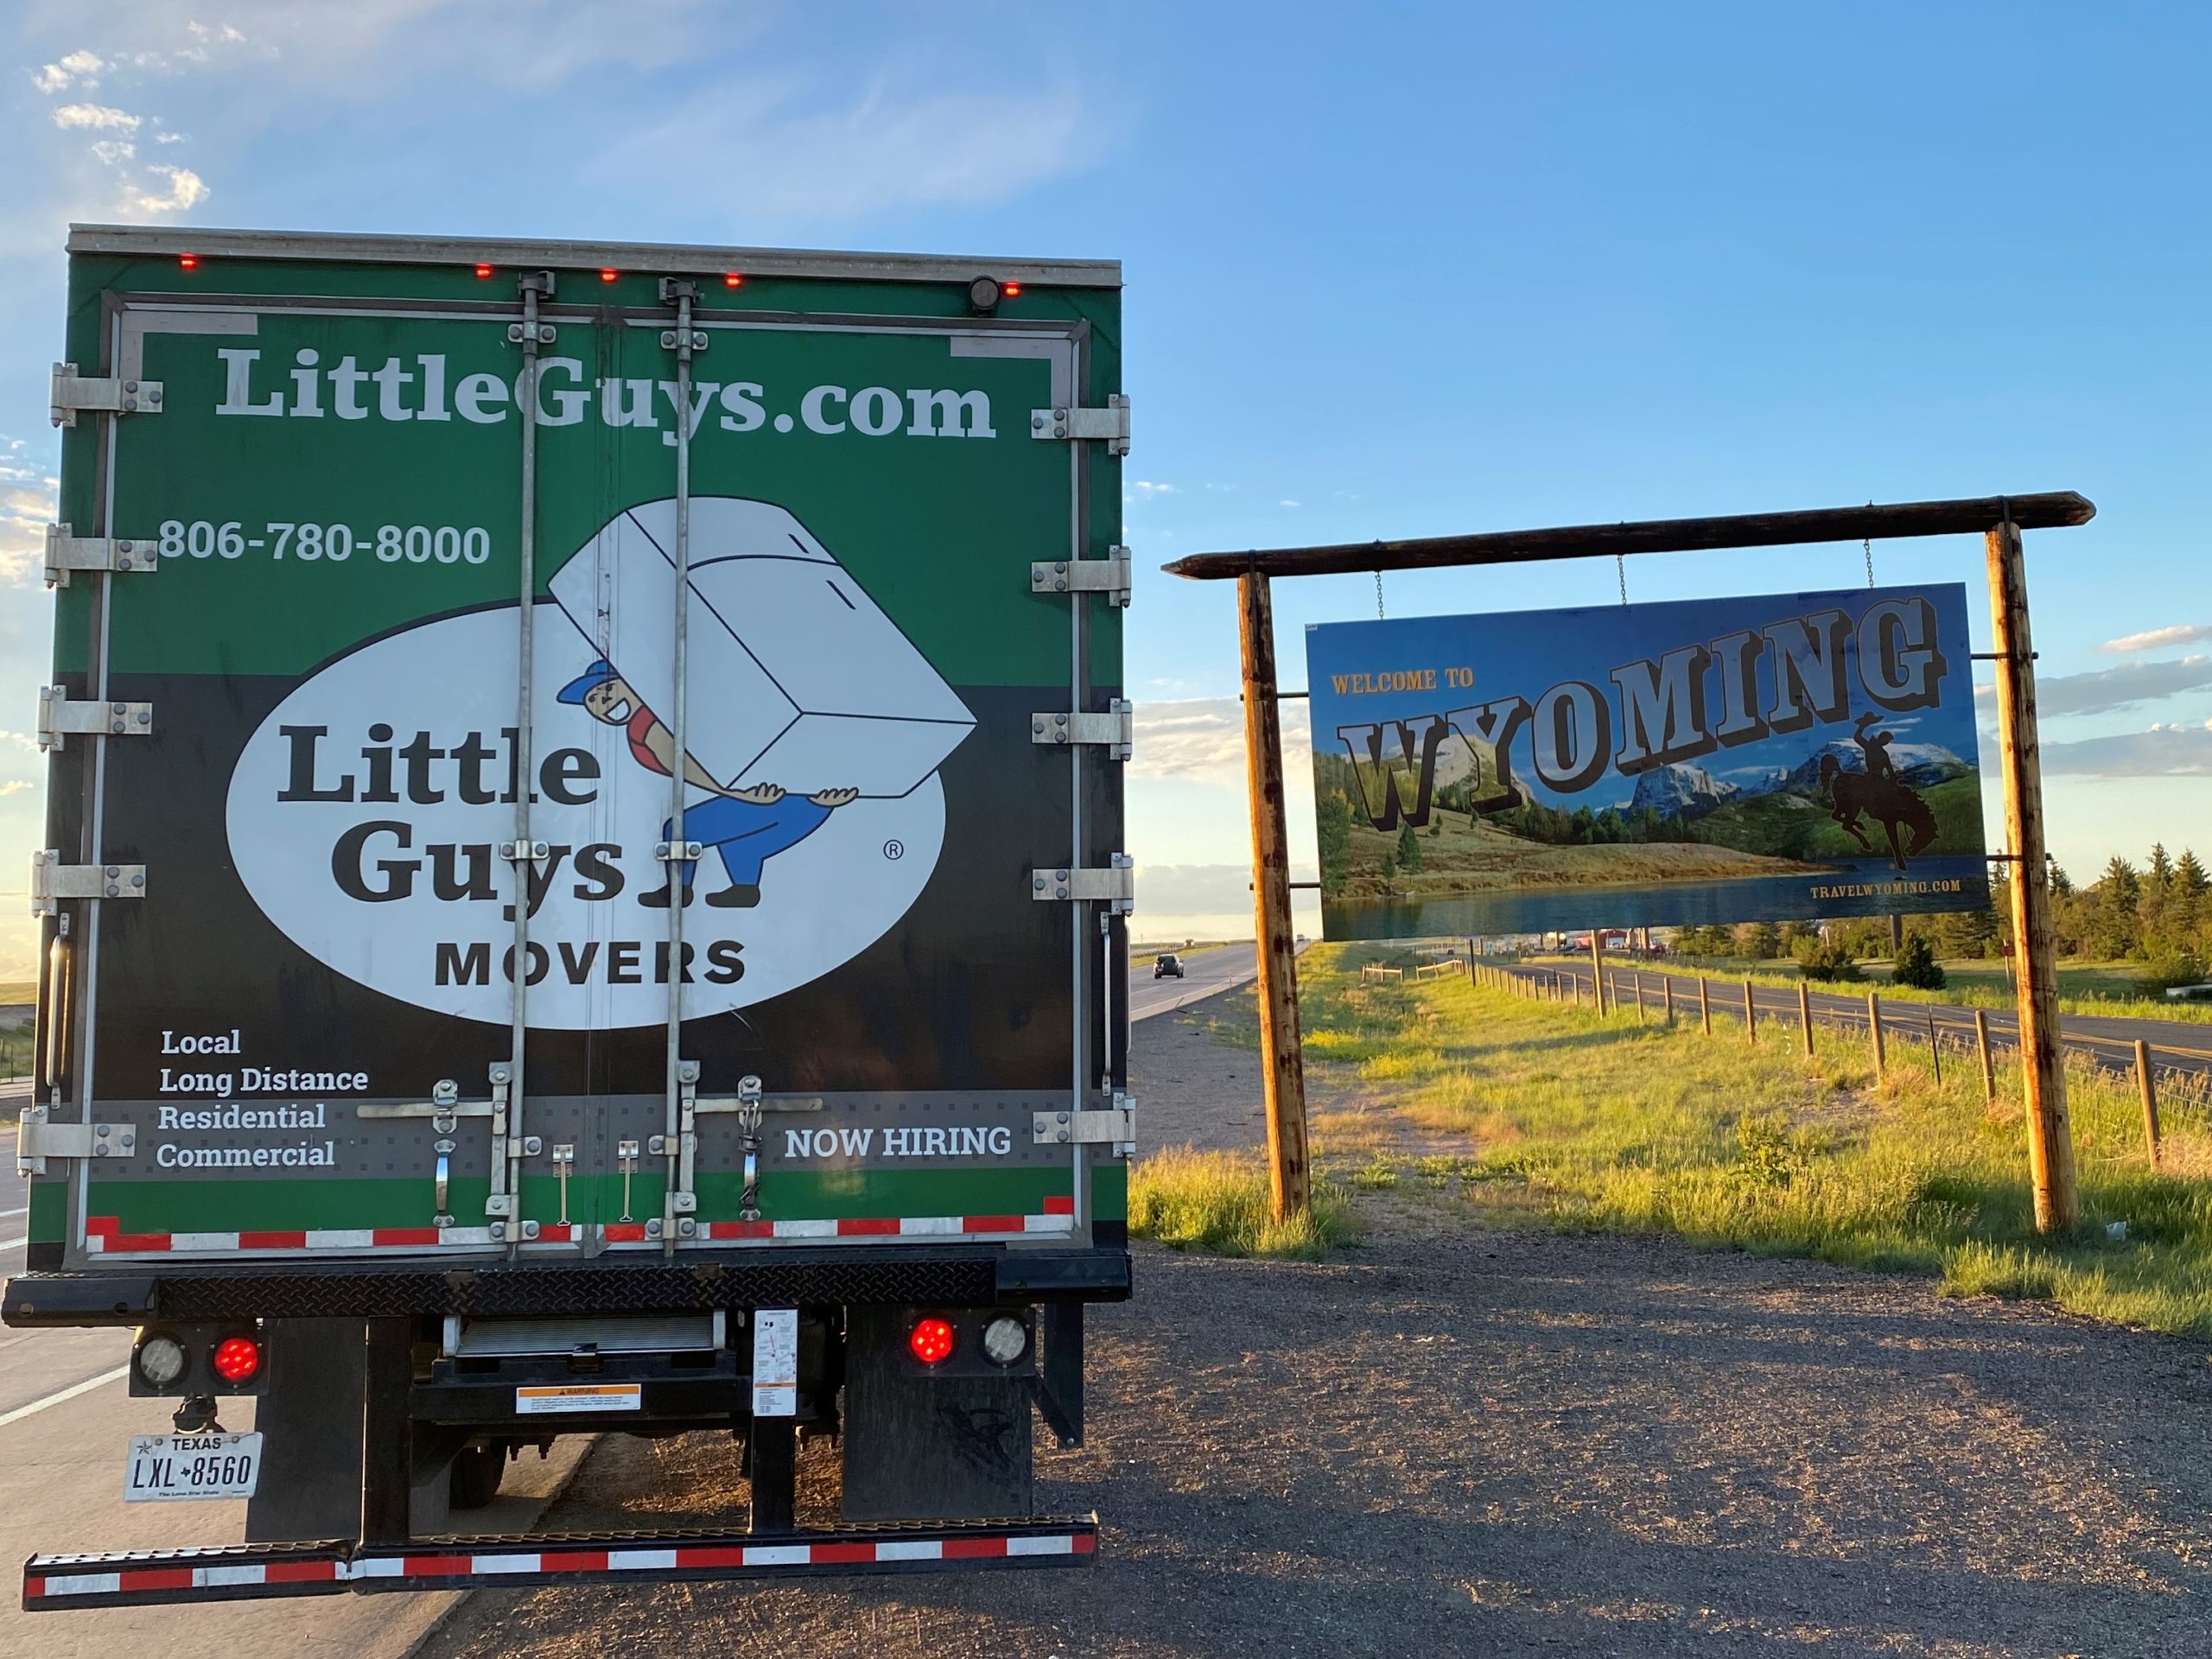 Little Guys Movers truck in front of Wyoming state sign